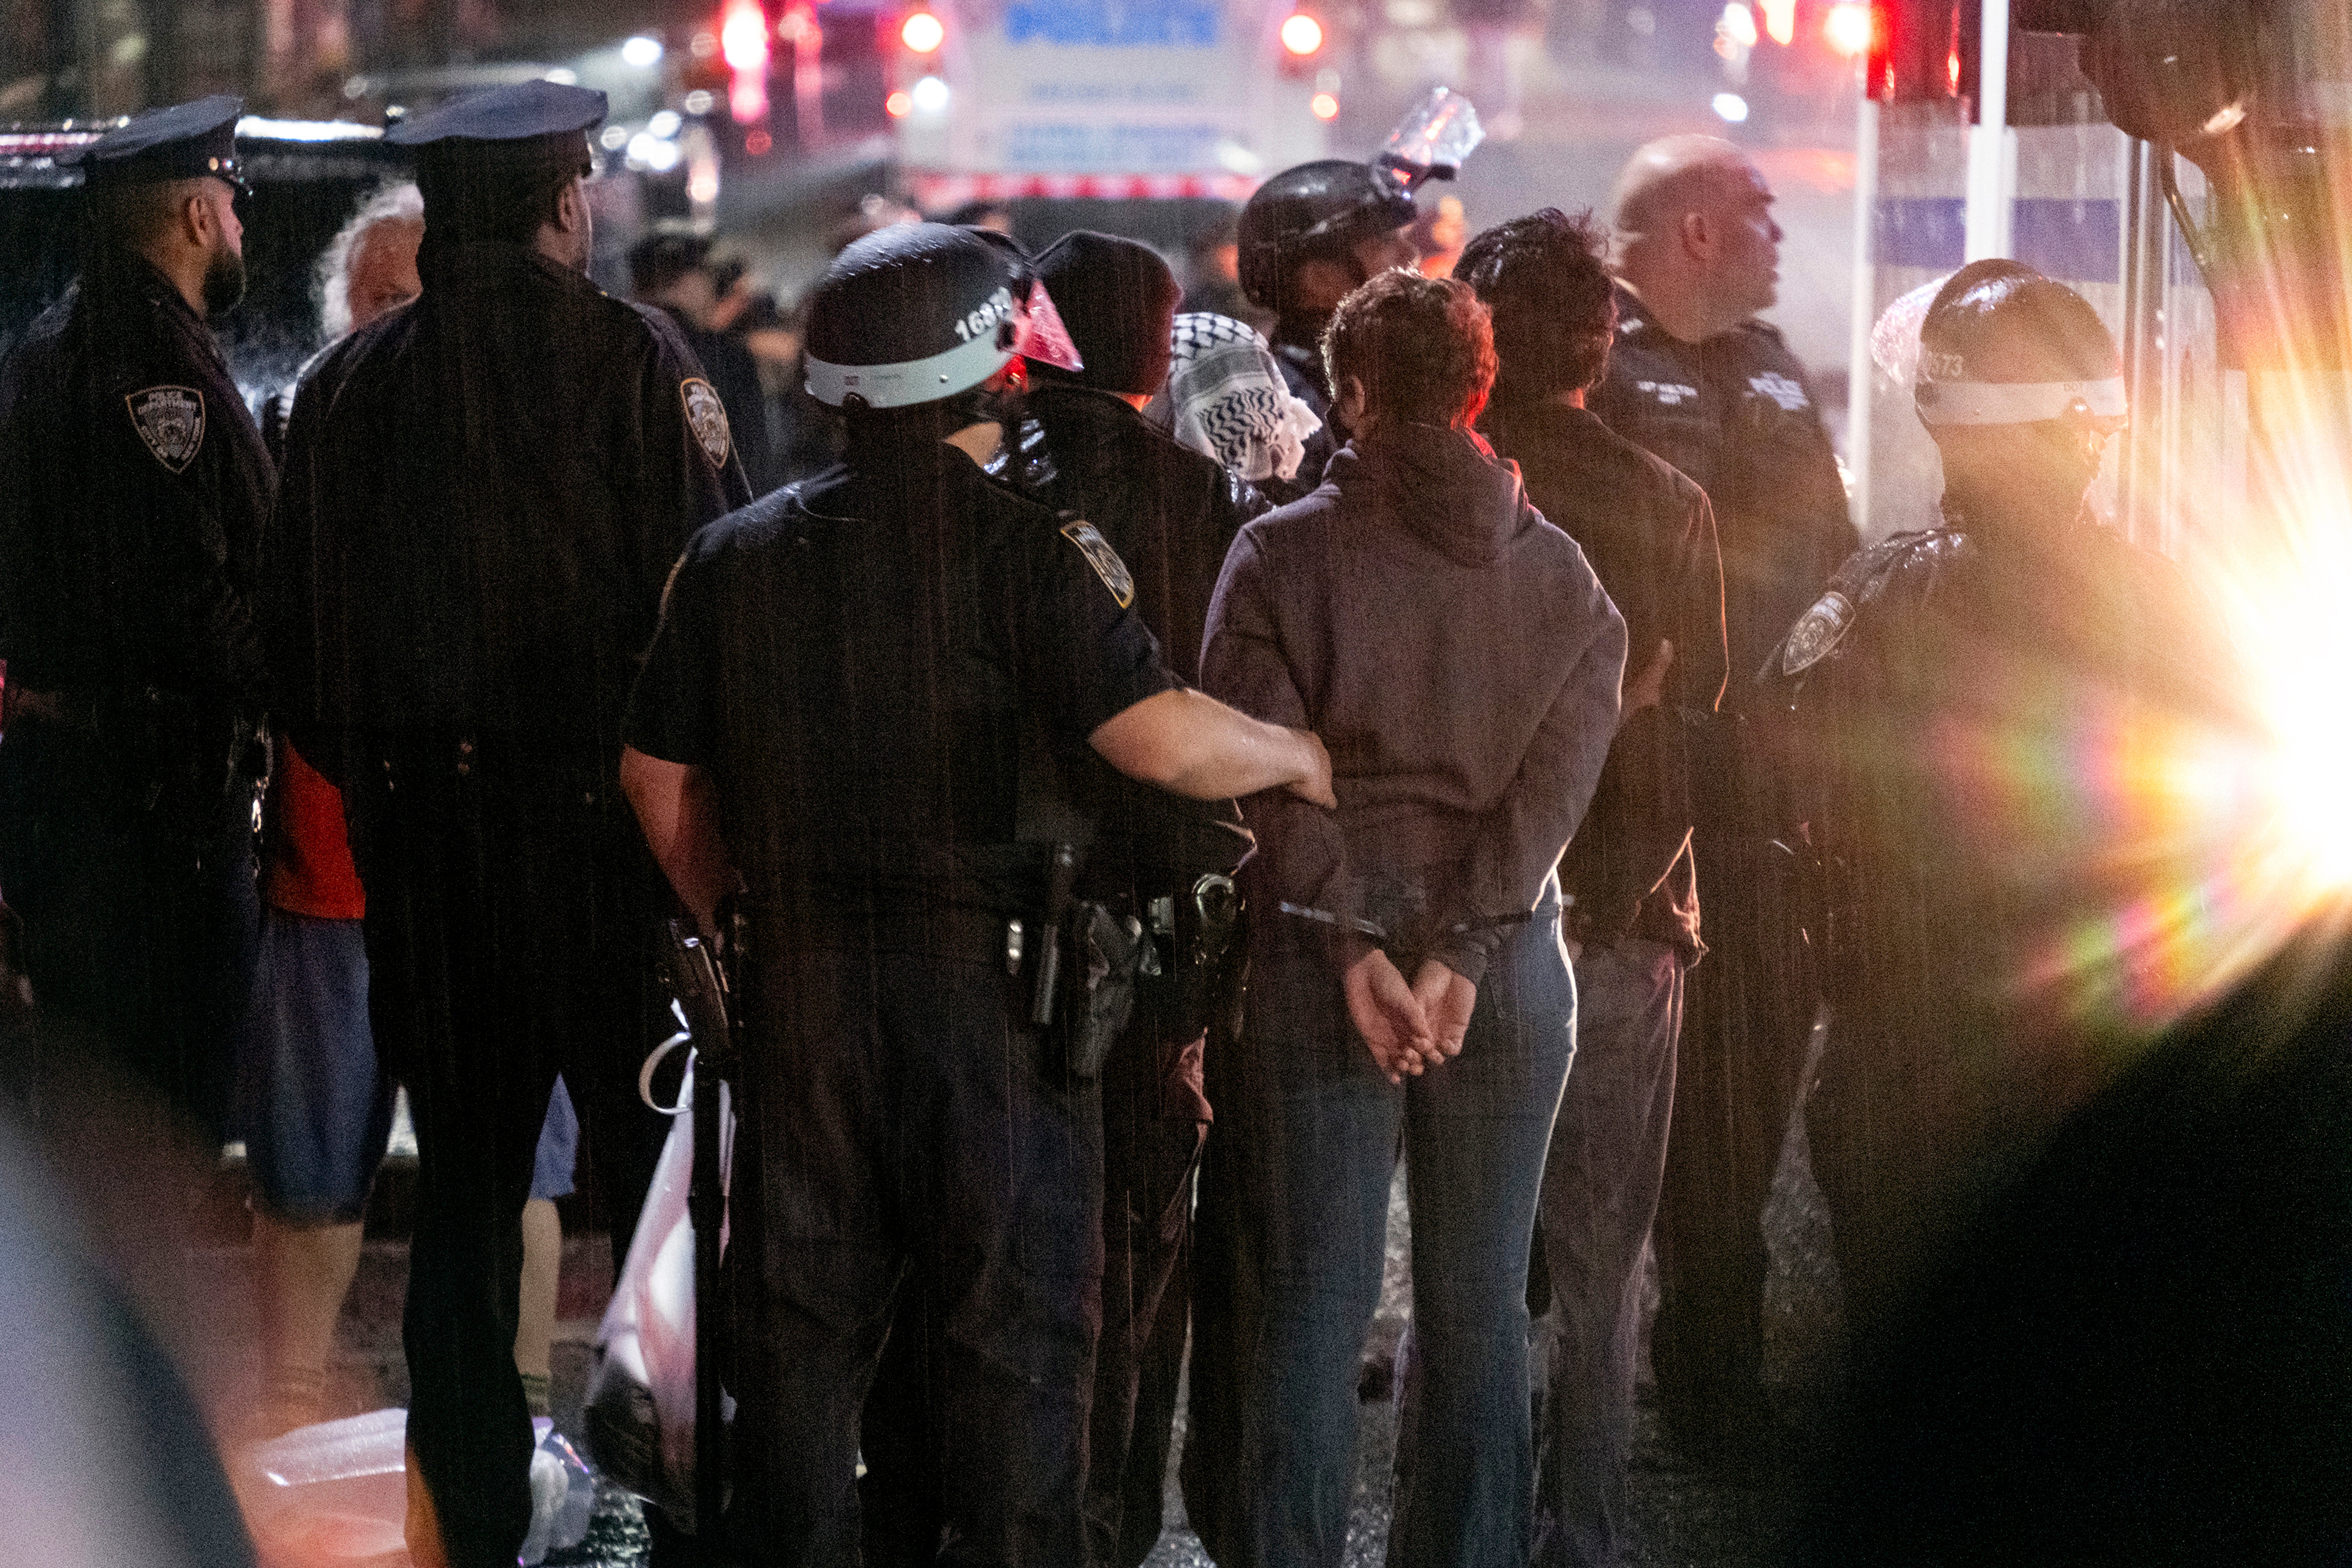 New York City police officers take people into custody near the Columbia University campus in New York on 30 April